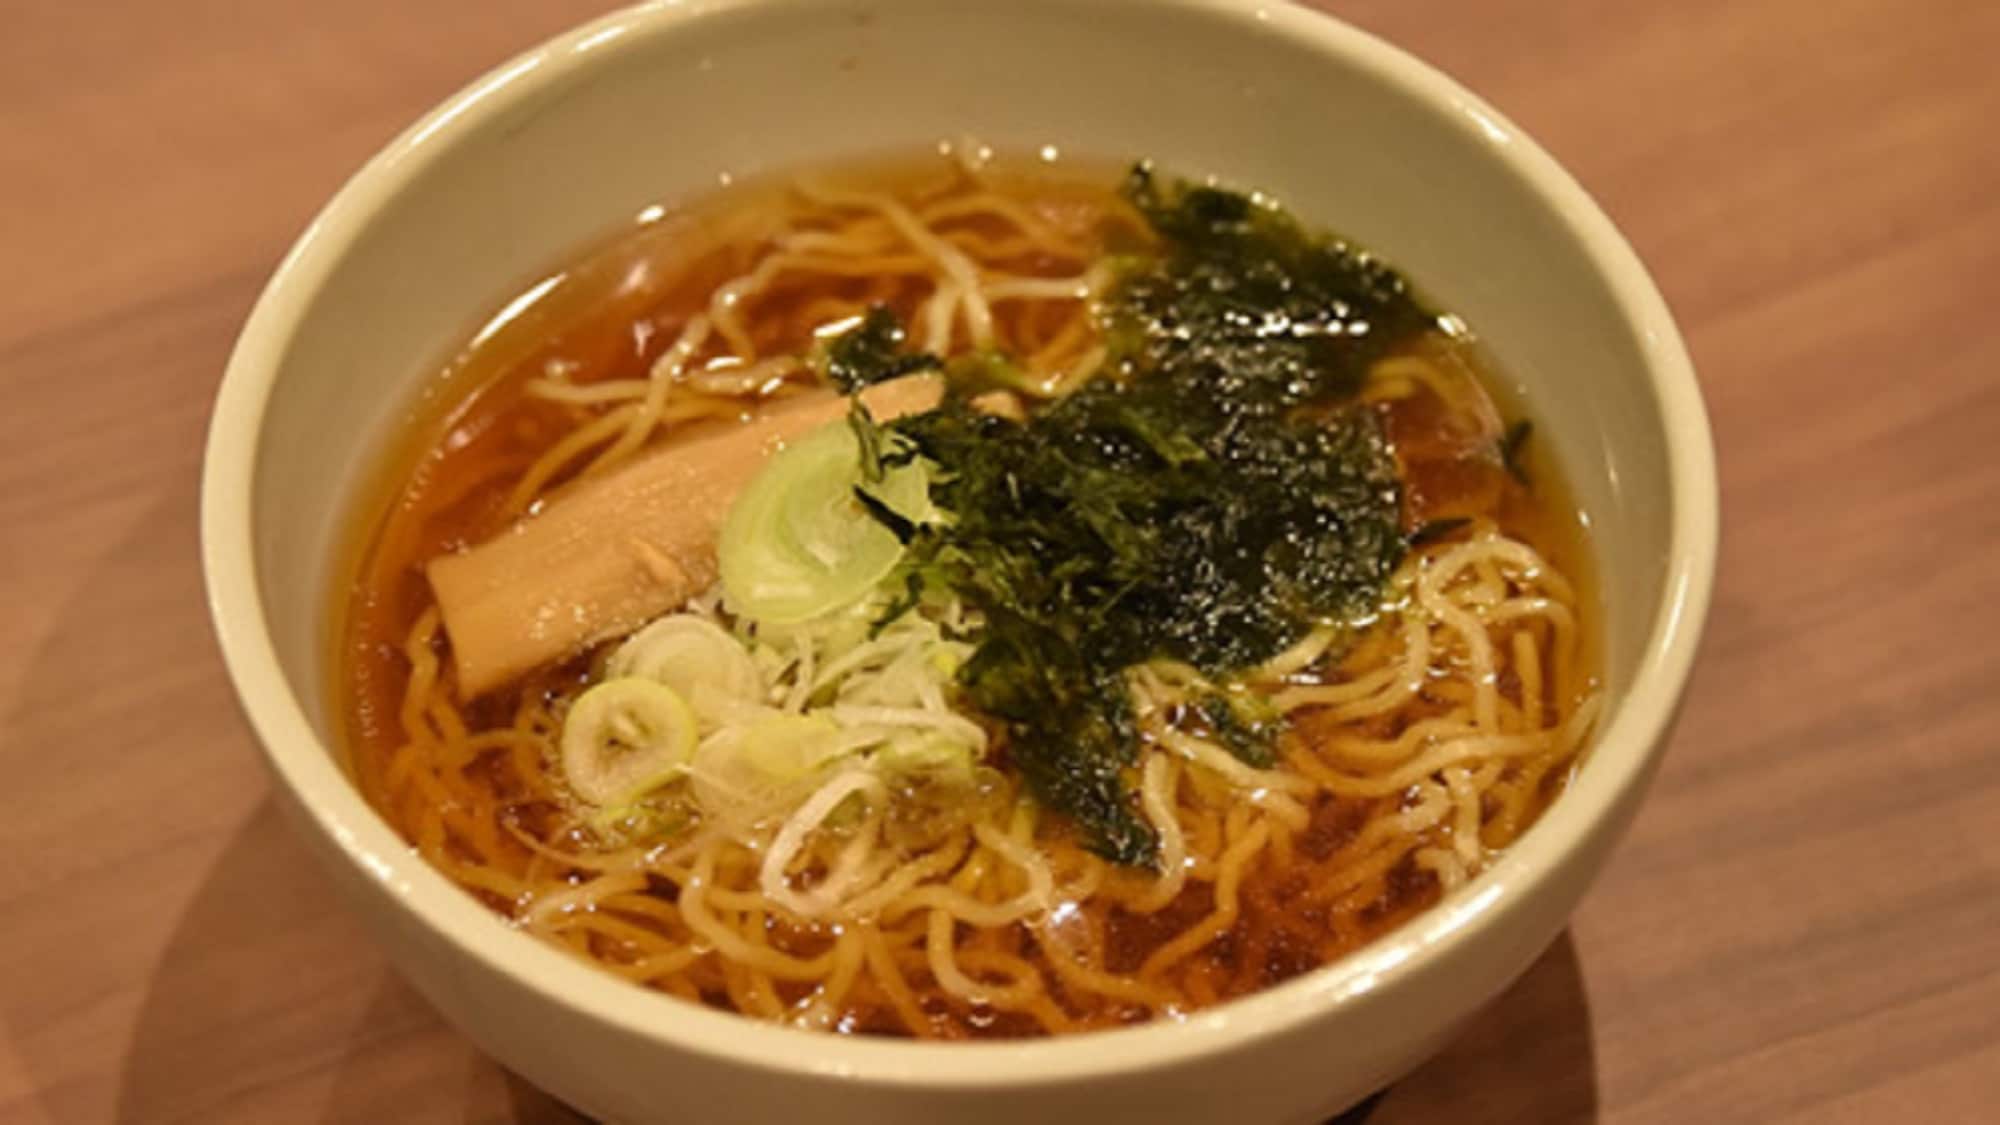 The familiar "Yonari Soba" Dormy Inn Higashimuroran is open from 21:30 to 23:00 at the restaurant on the 2nd floor.